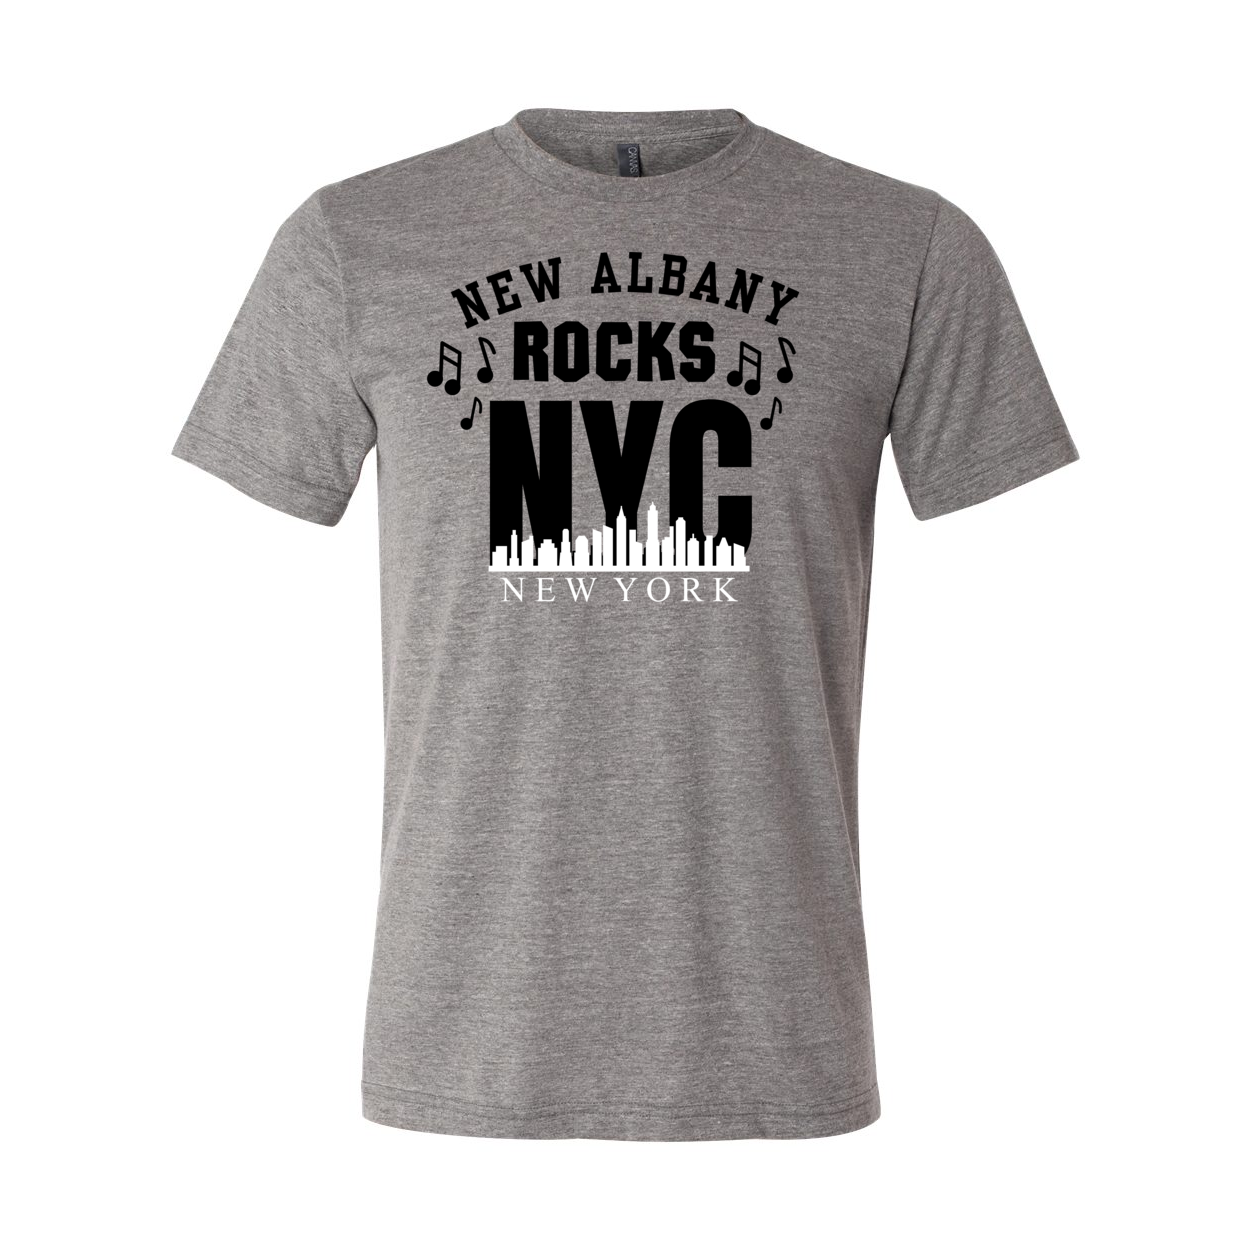 Adult Unisex Super Soft Rock NYC Short Sleeve Graphic Tee - New Albany Eagles